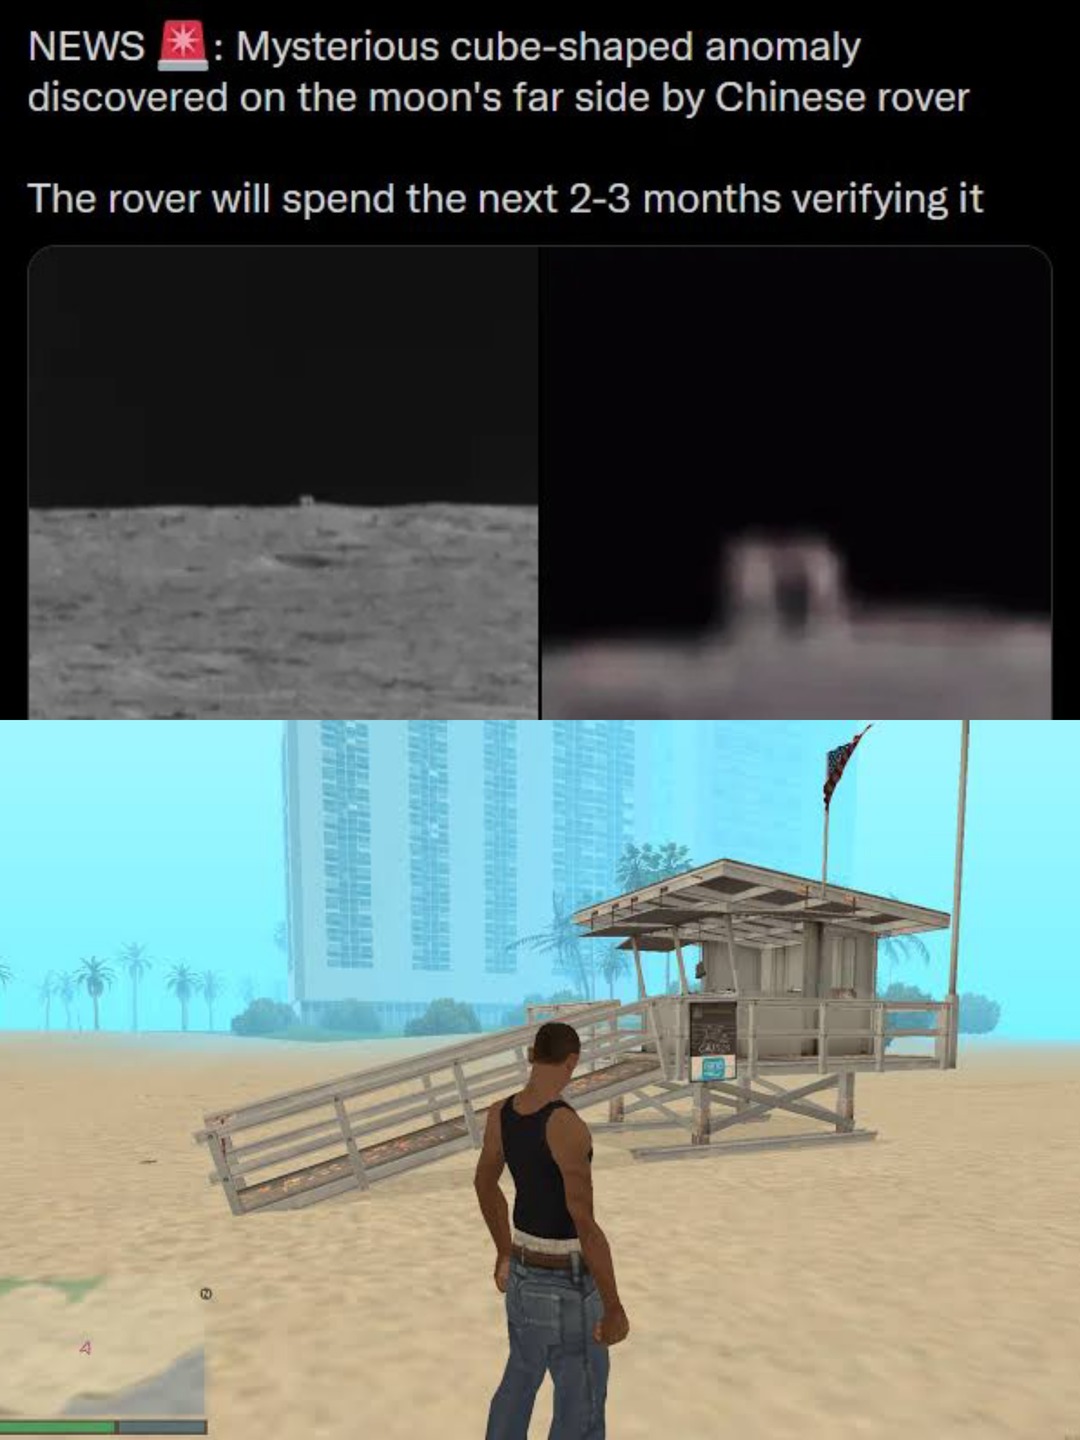 Don't worry guys, Grove Street Games is working to fix it. - meme